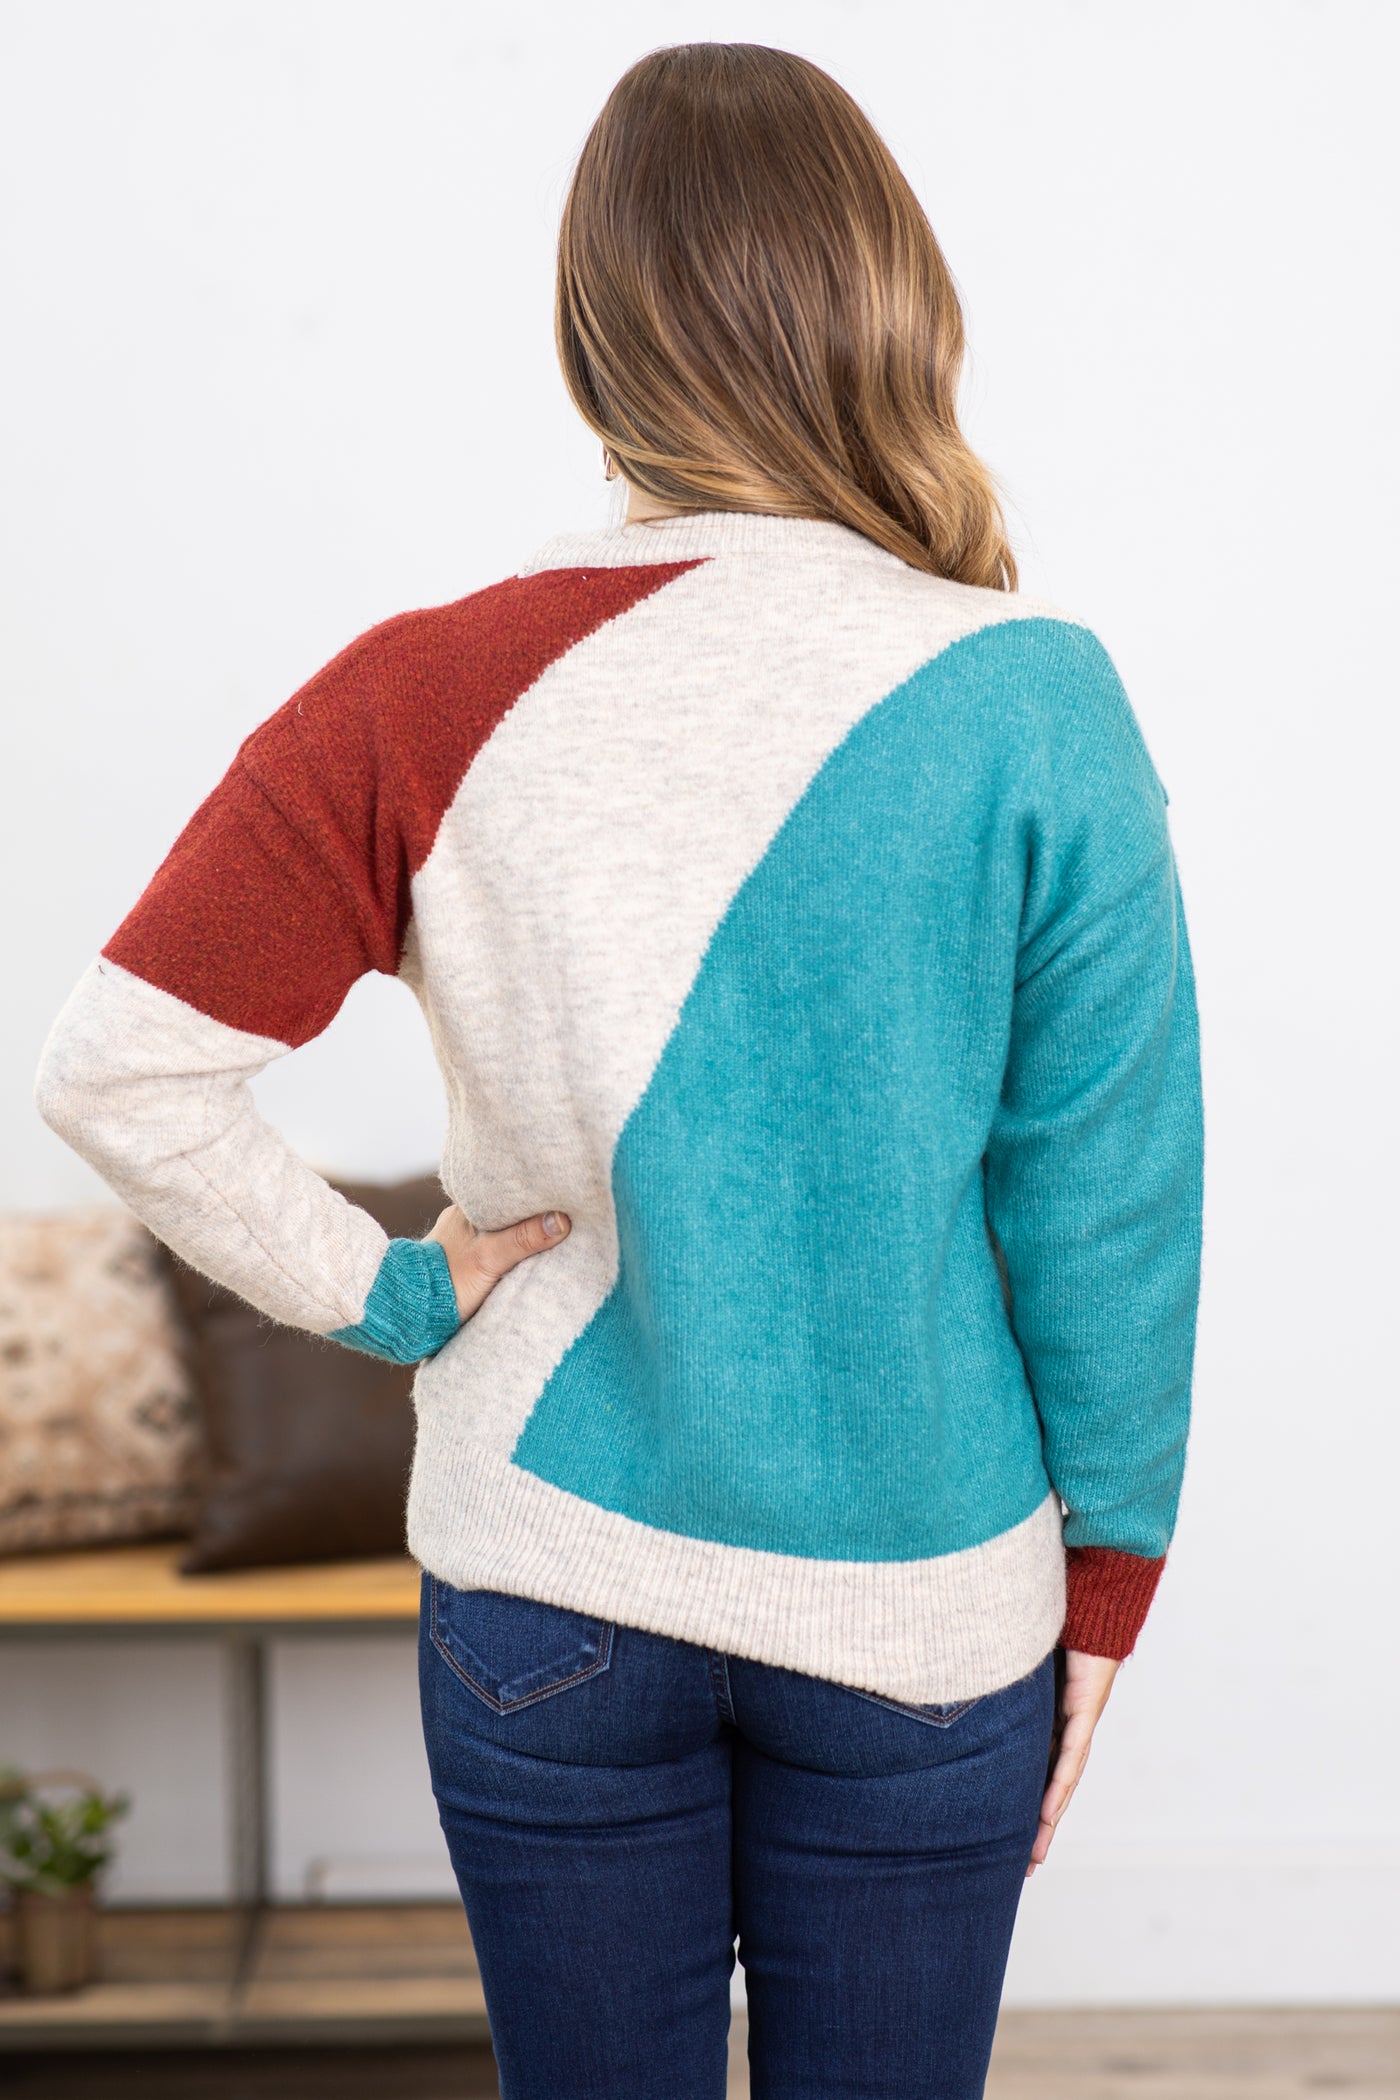 Teal and Oatmeal Colorblock Sweater